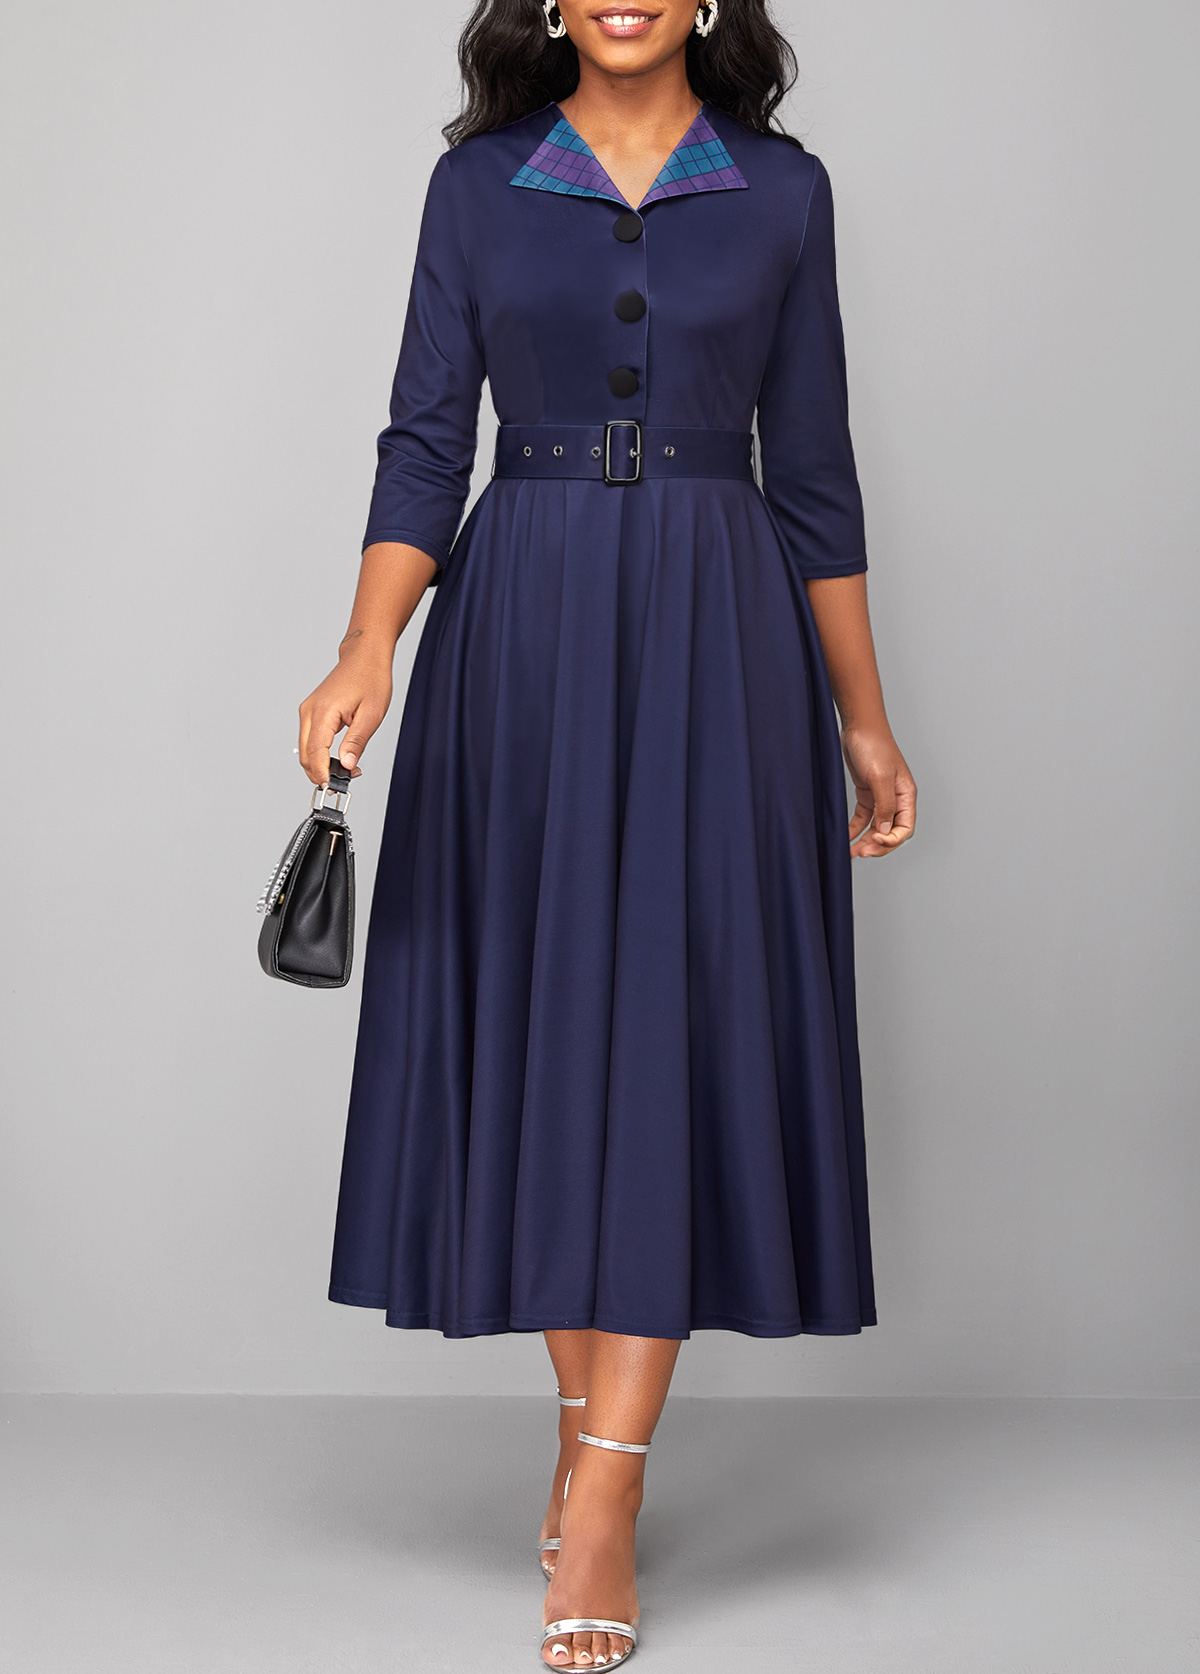 Plaid Button Belted Navy Turn Down Collar Dress